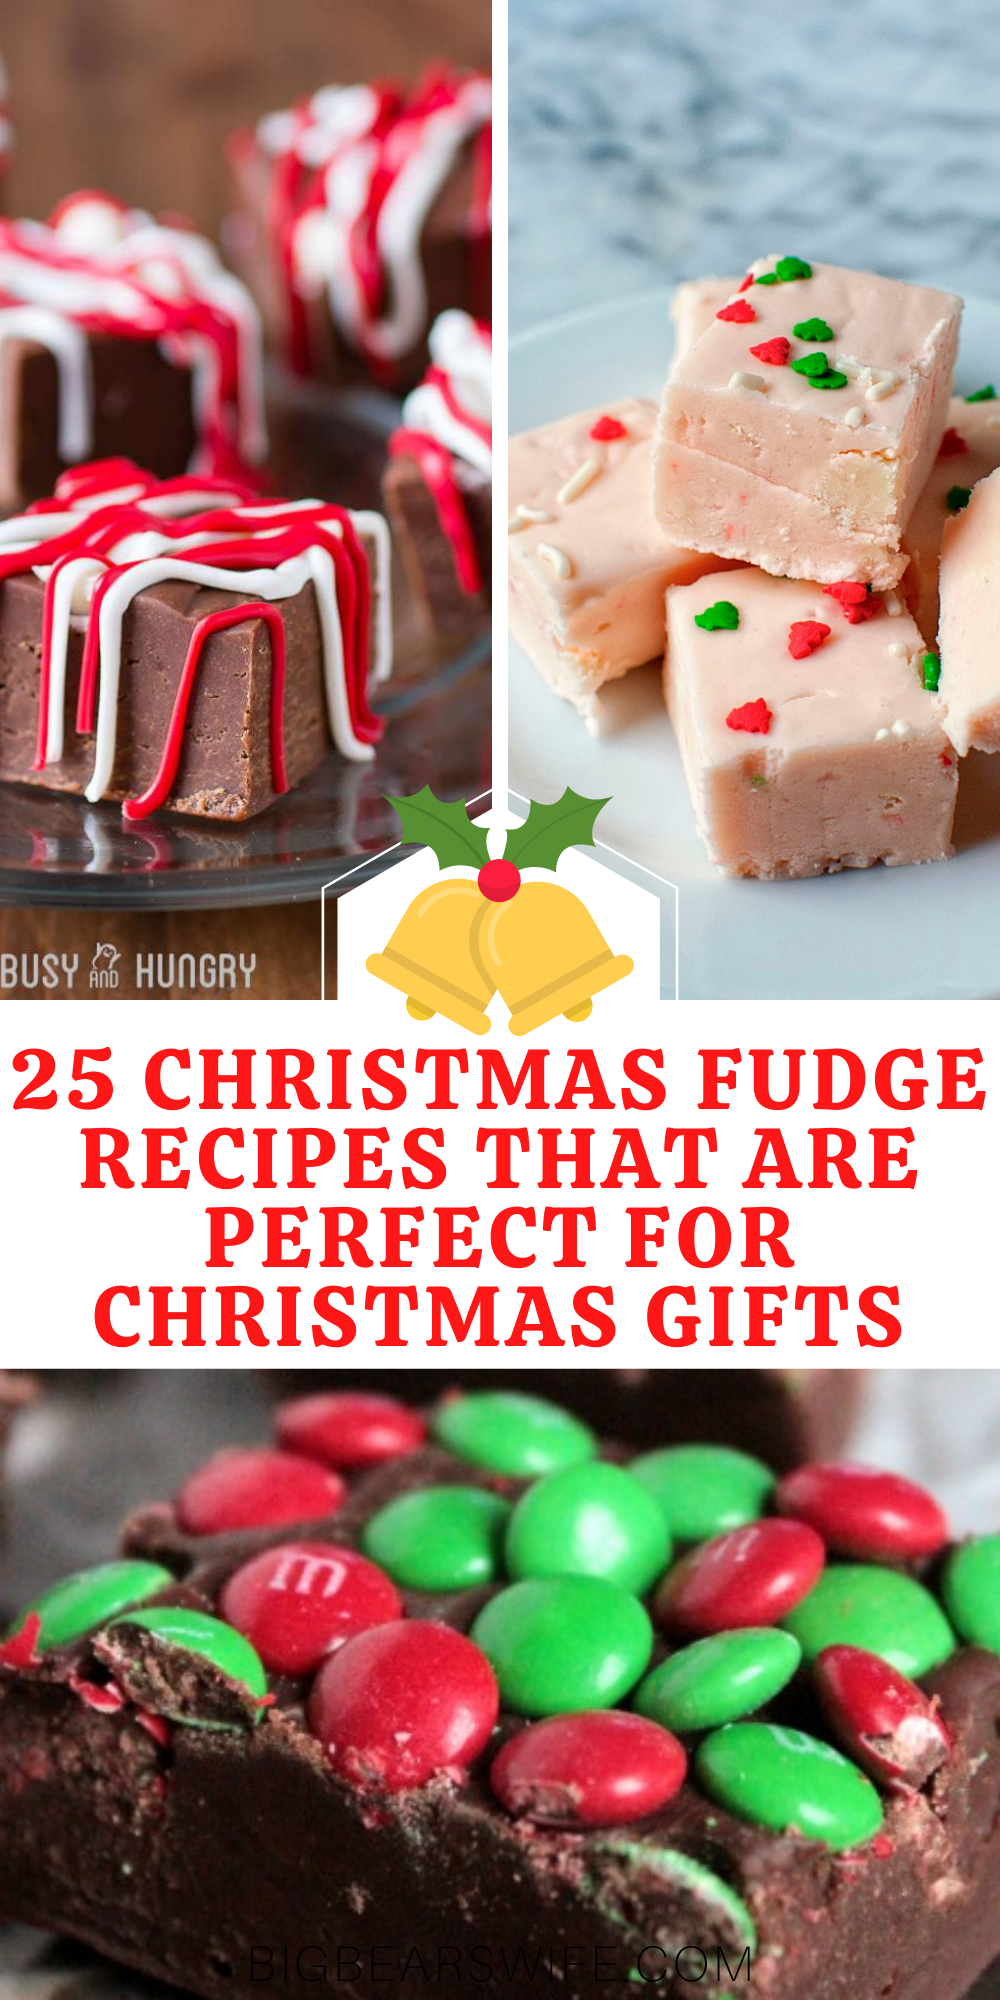 25 Christmas Fudge Recipes that are perfect for Christmas Gifts - Homemade gifts from the kitchen are always some of the best gifts that you can give or receive at Christmas! This list has 25 Christmas Fudge Recipes that are perfect for Christmas Gifts or hostess gifts! via @bigbearswife